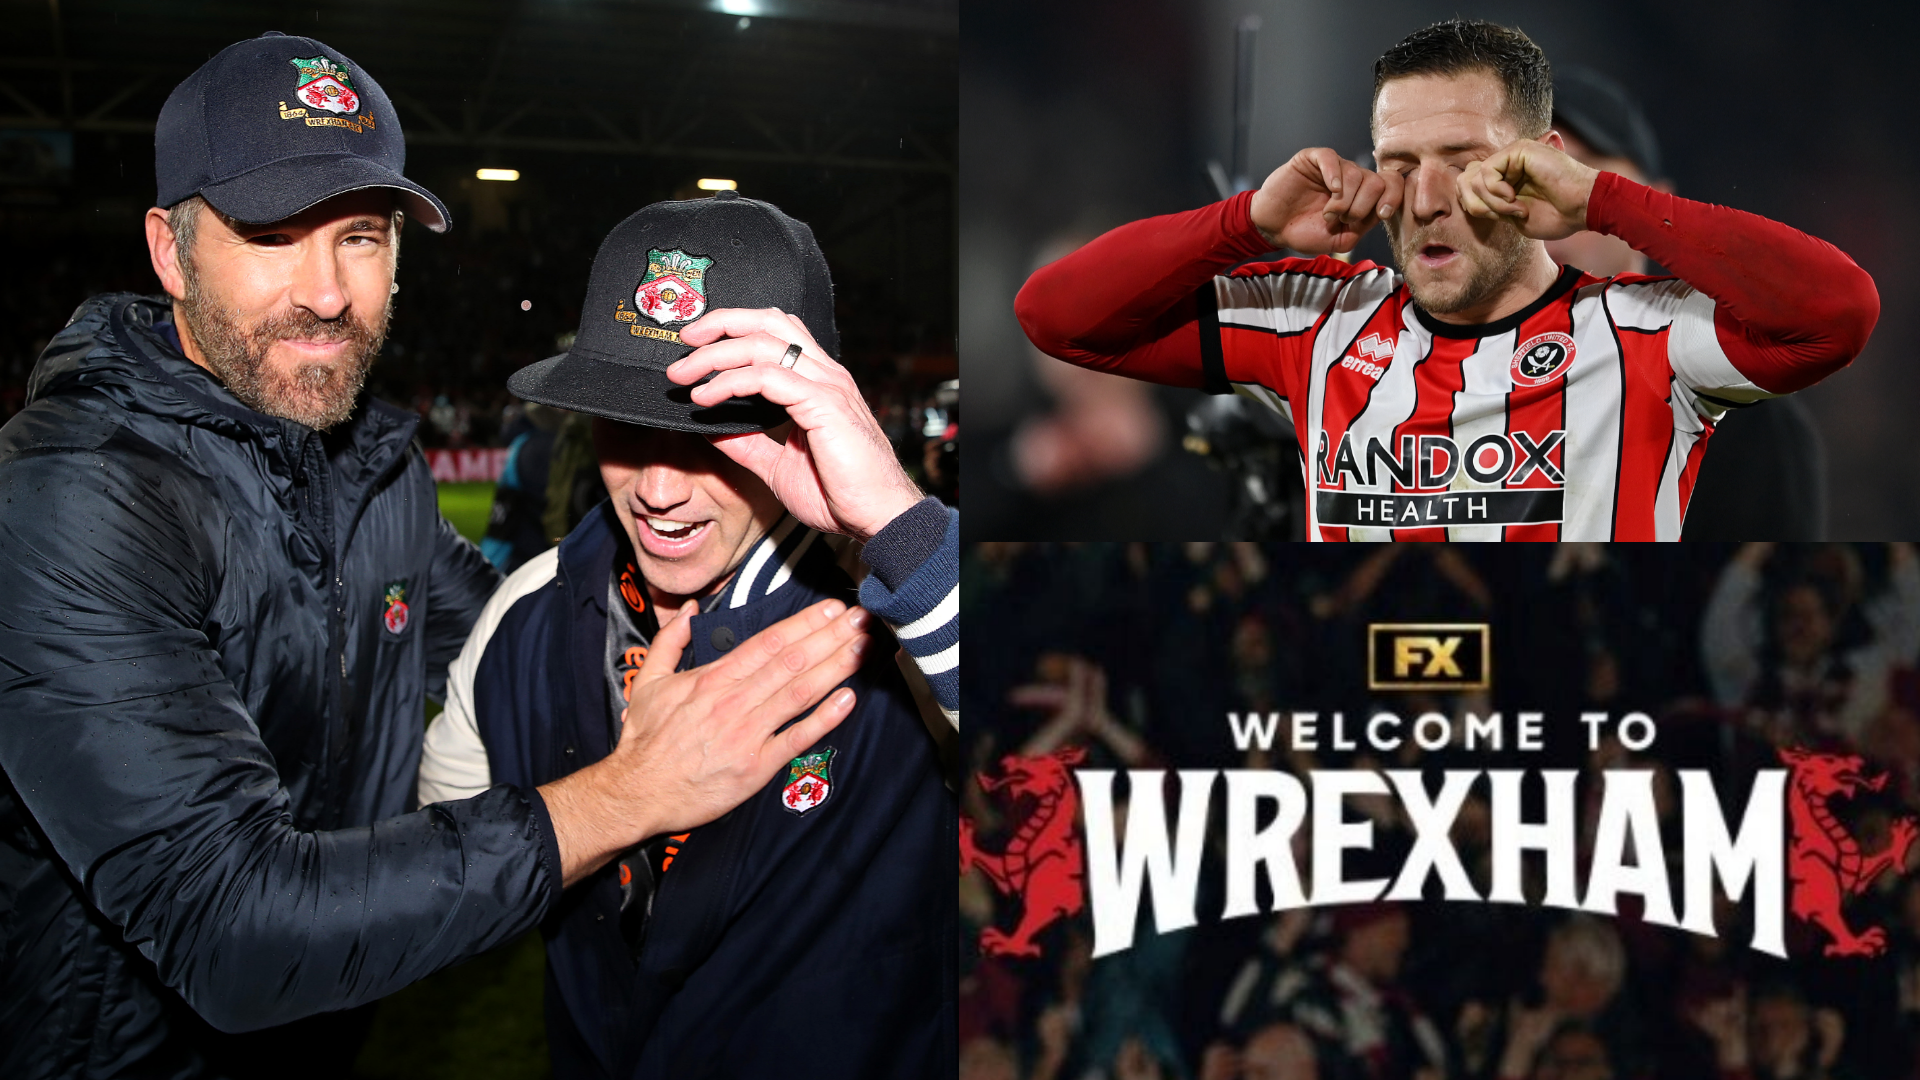 ‘Have a documentary about it!’ - Billy Sharp fires fresh dig at Wrexham, Ryan Reynolds & Rob McElhenney but jokes he could become next manager when Phil Parkinson ‘gets the sack’